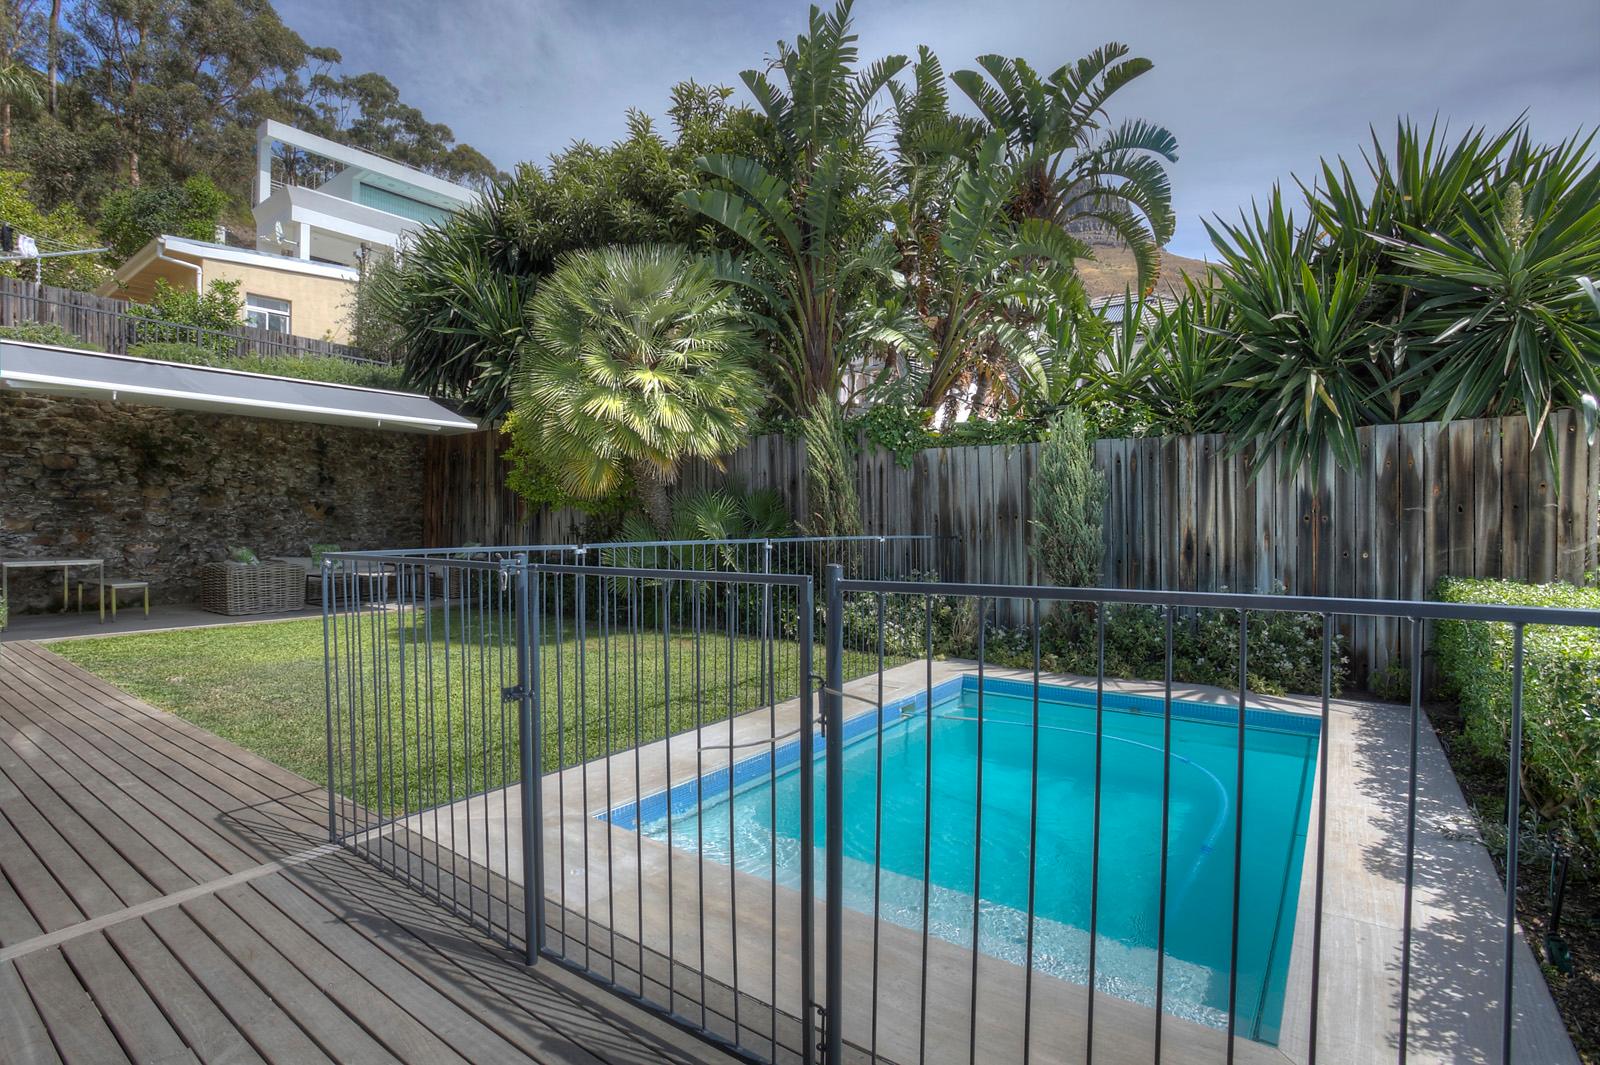 Photo 4 of Bordeaux Villa accommodation in Fresnaye, Cape Town with 4 bedrooms and 3.5 bathrooms